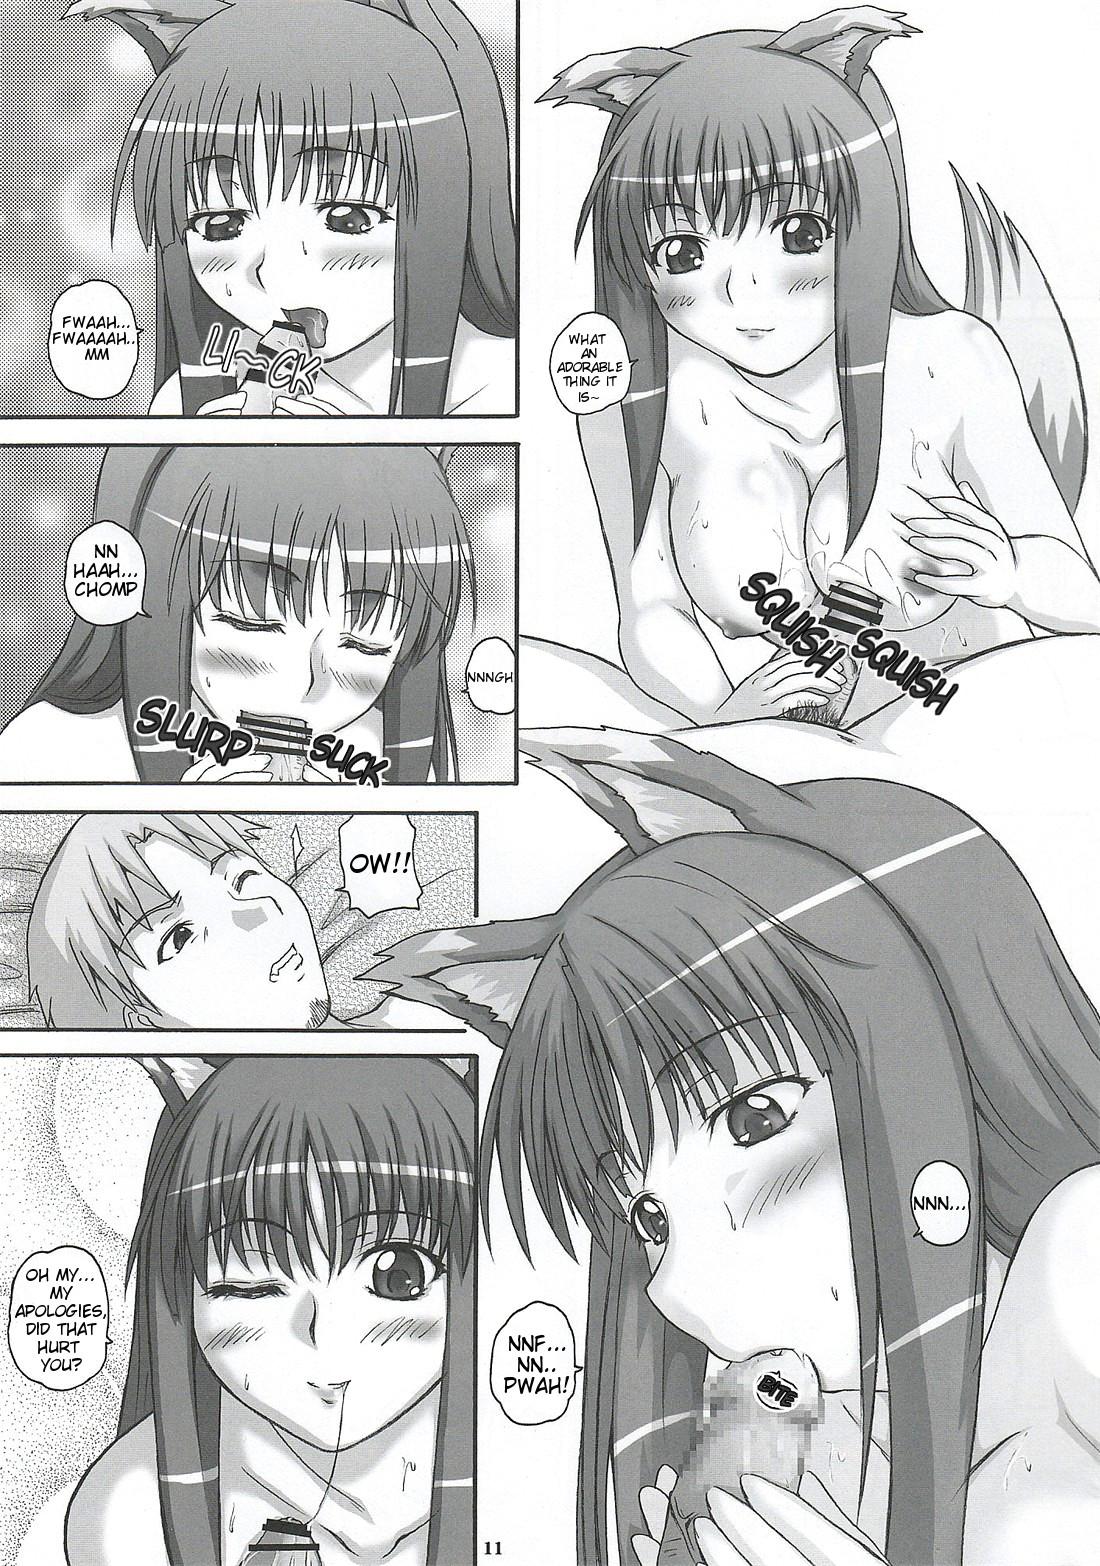 Japan 2Stroke TY - Spice and wolf Hardsex - Page 10